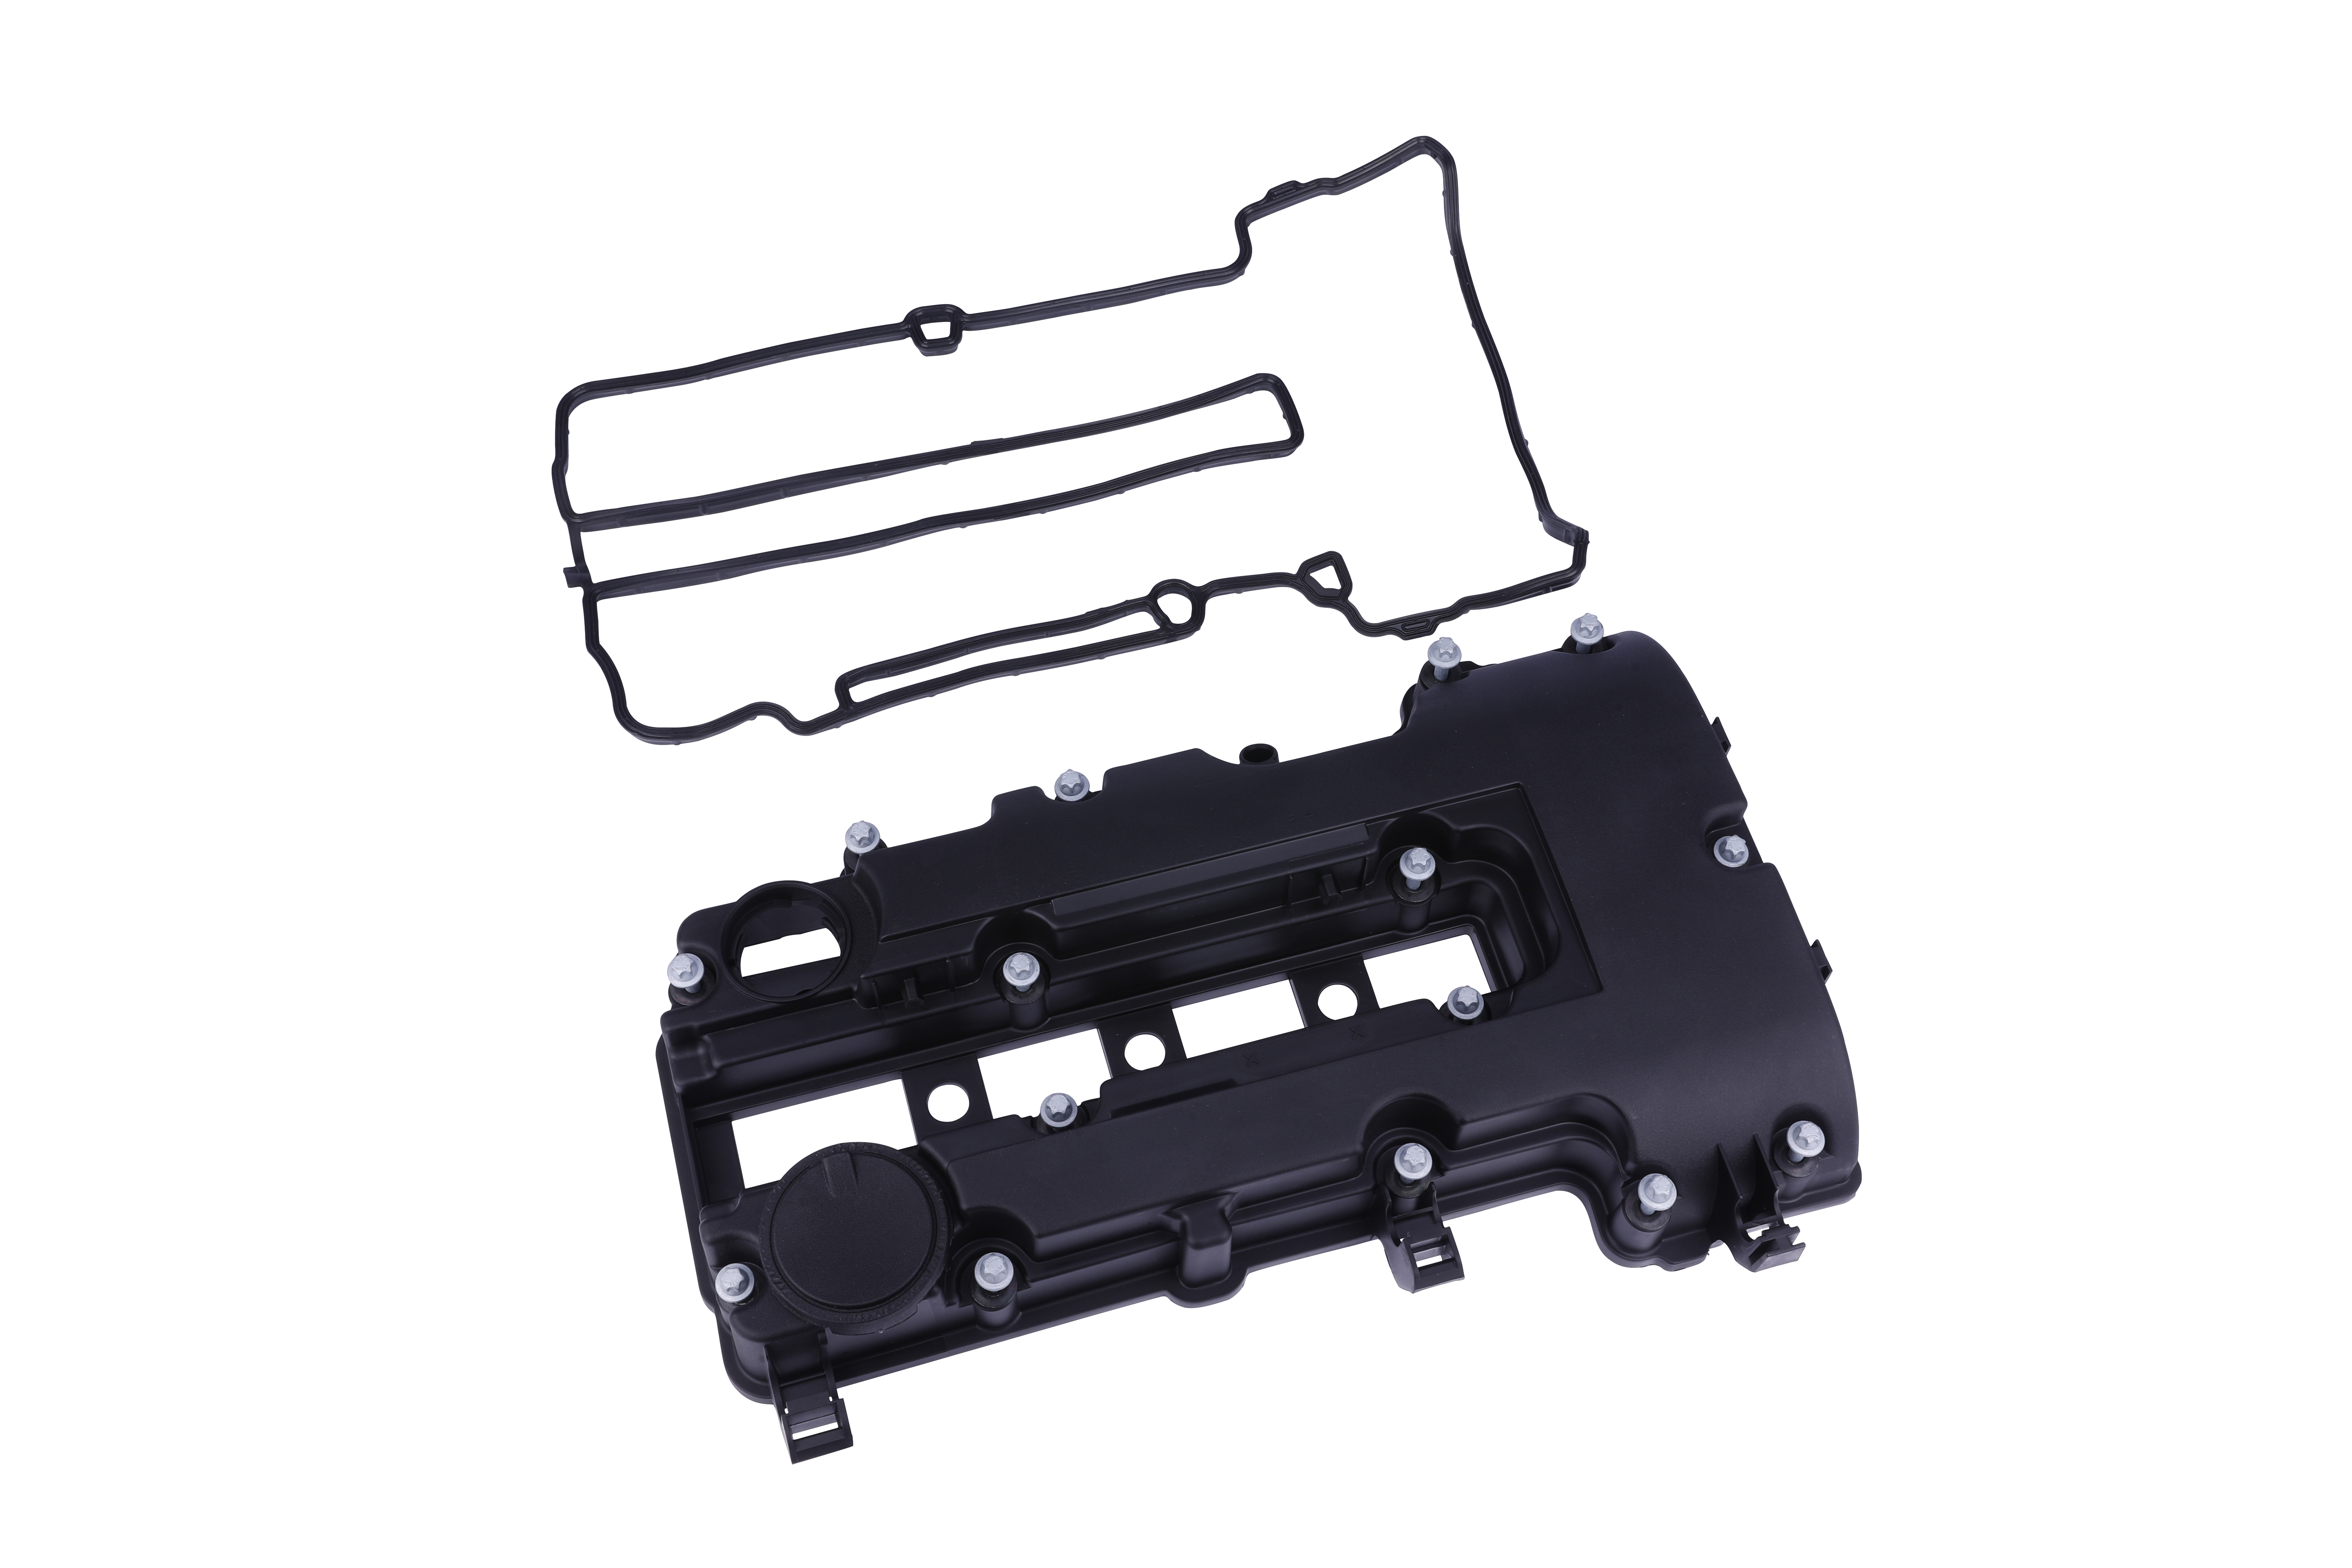 Camshaft Valve Cover with Gasket - Replaces 55573746 Buick, Cadillac and Chevy Vehicles Image